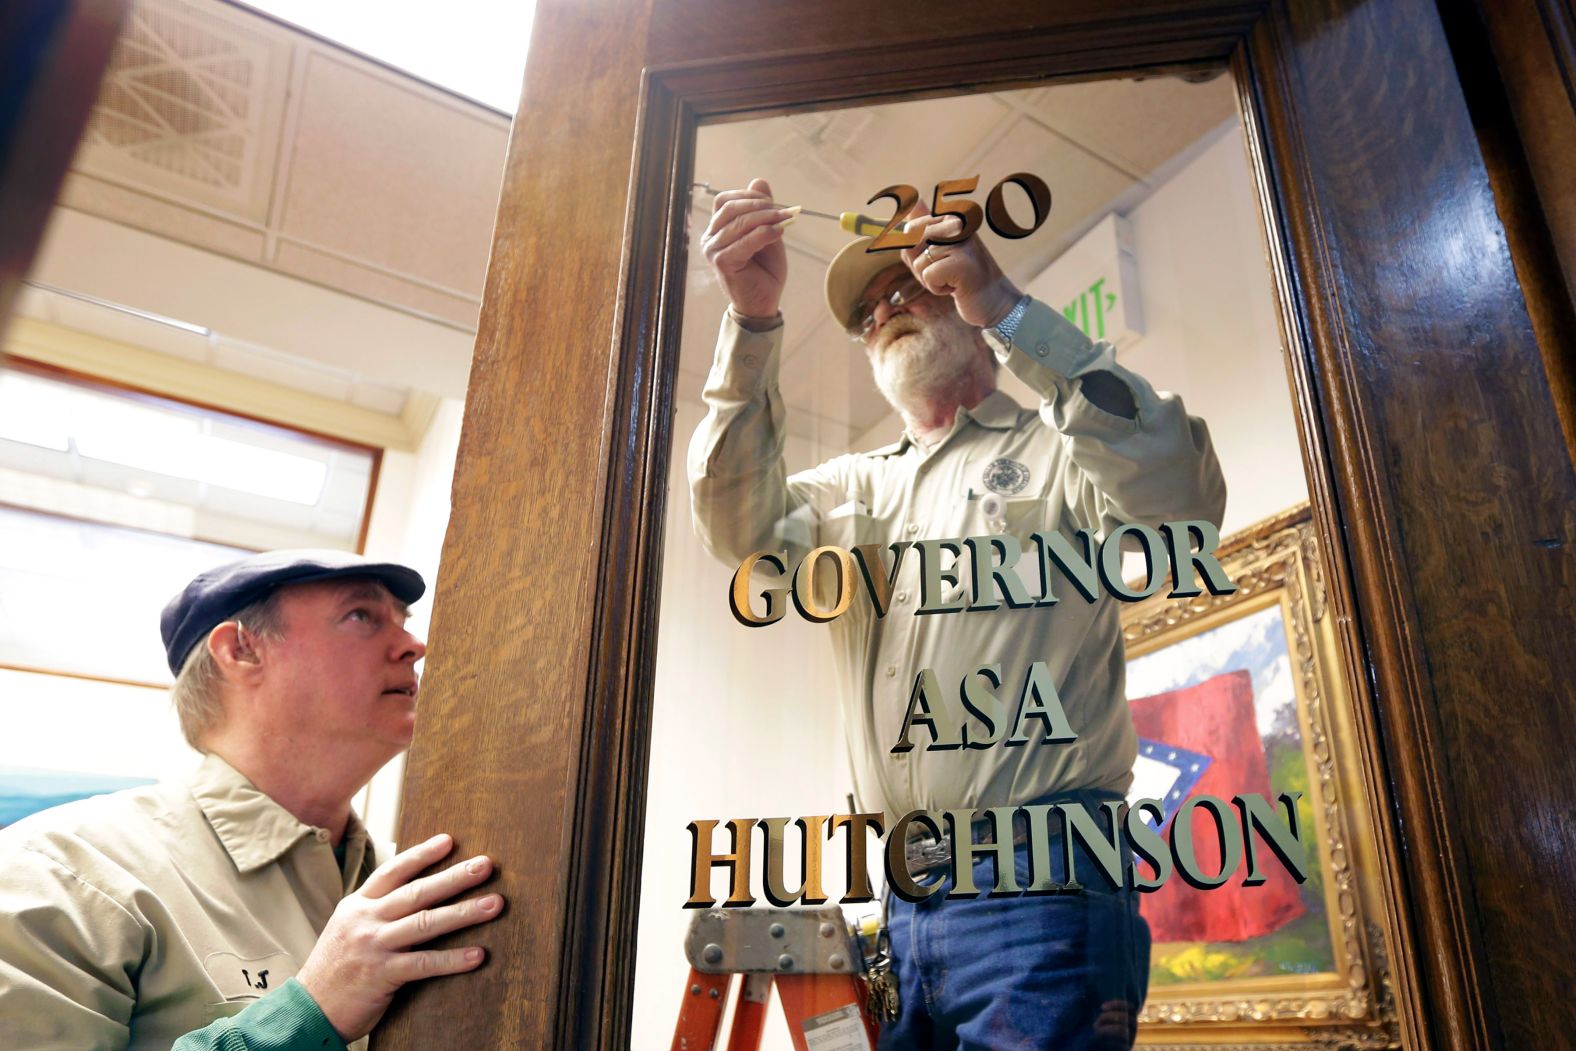 Ronnie Gautney, right, and T.J. Macklin change the glass on the door at the governor's office in Little Rock in January 2015.